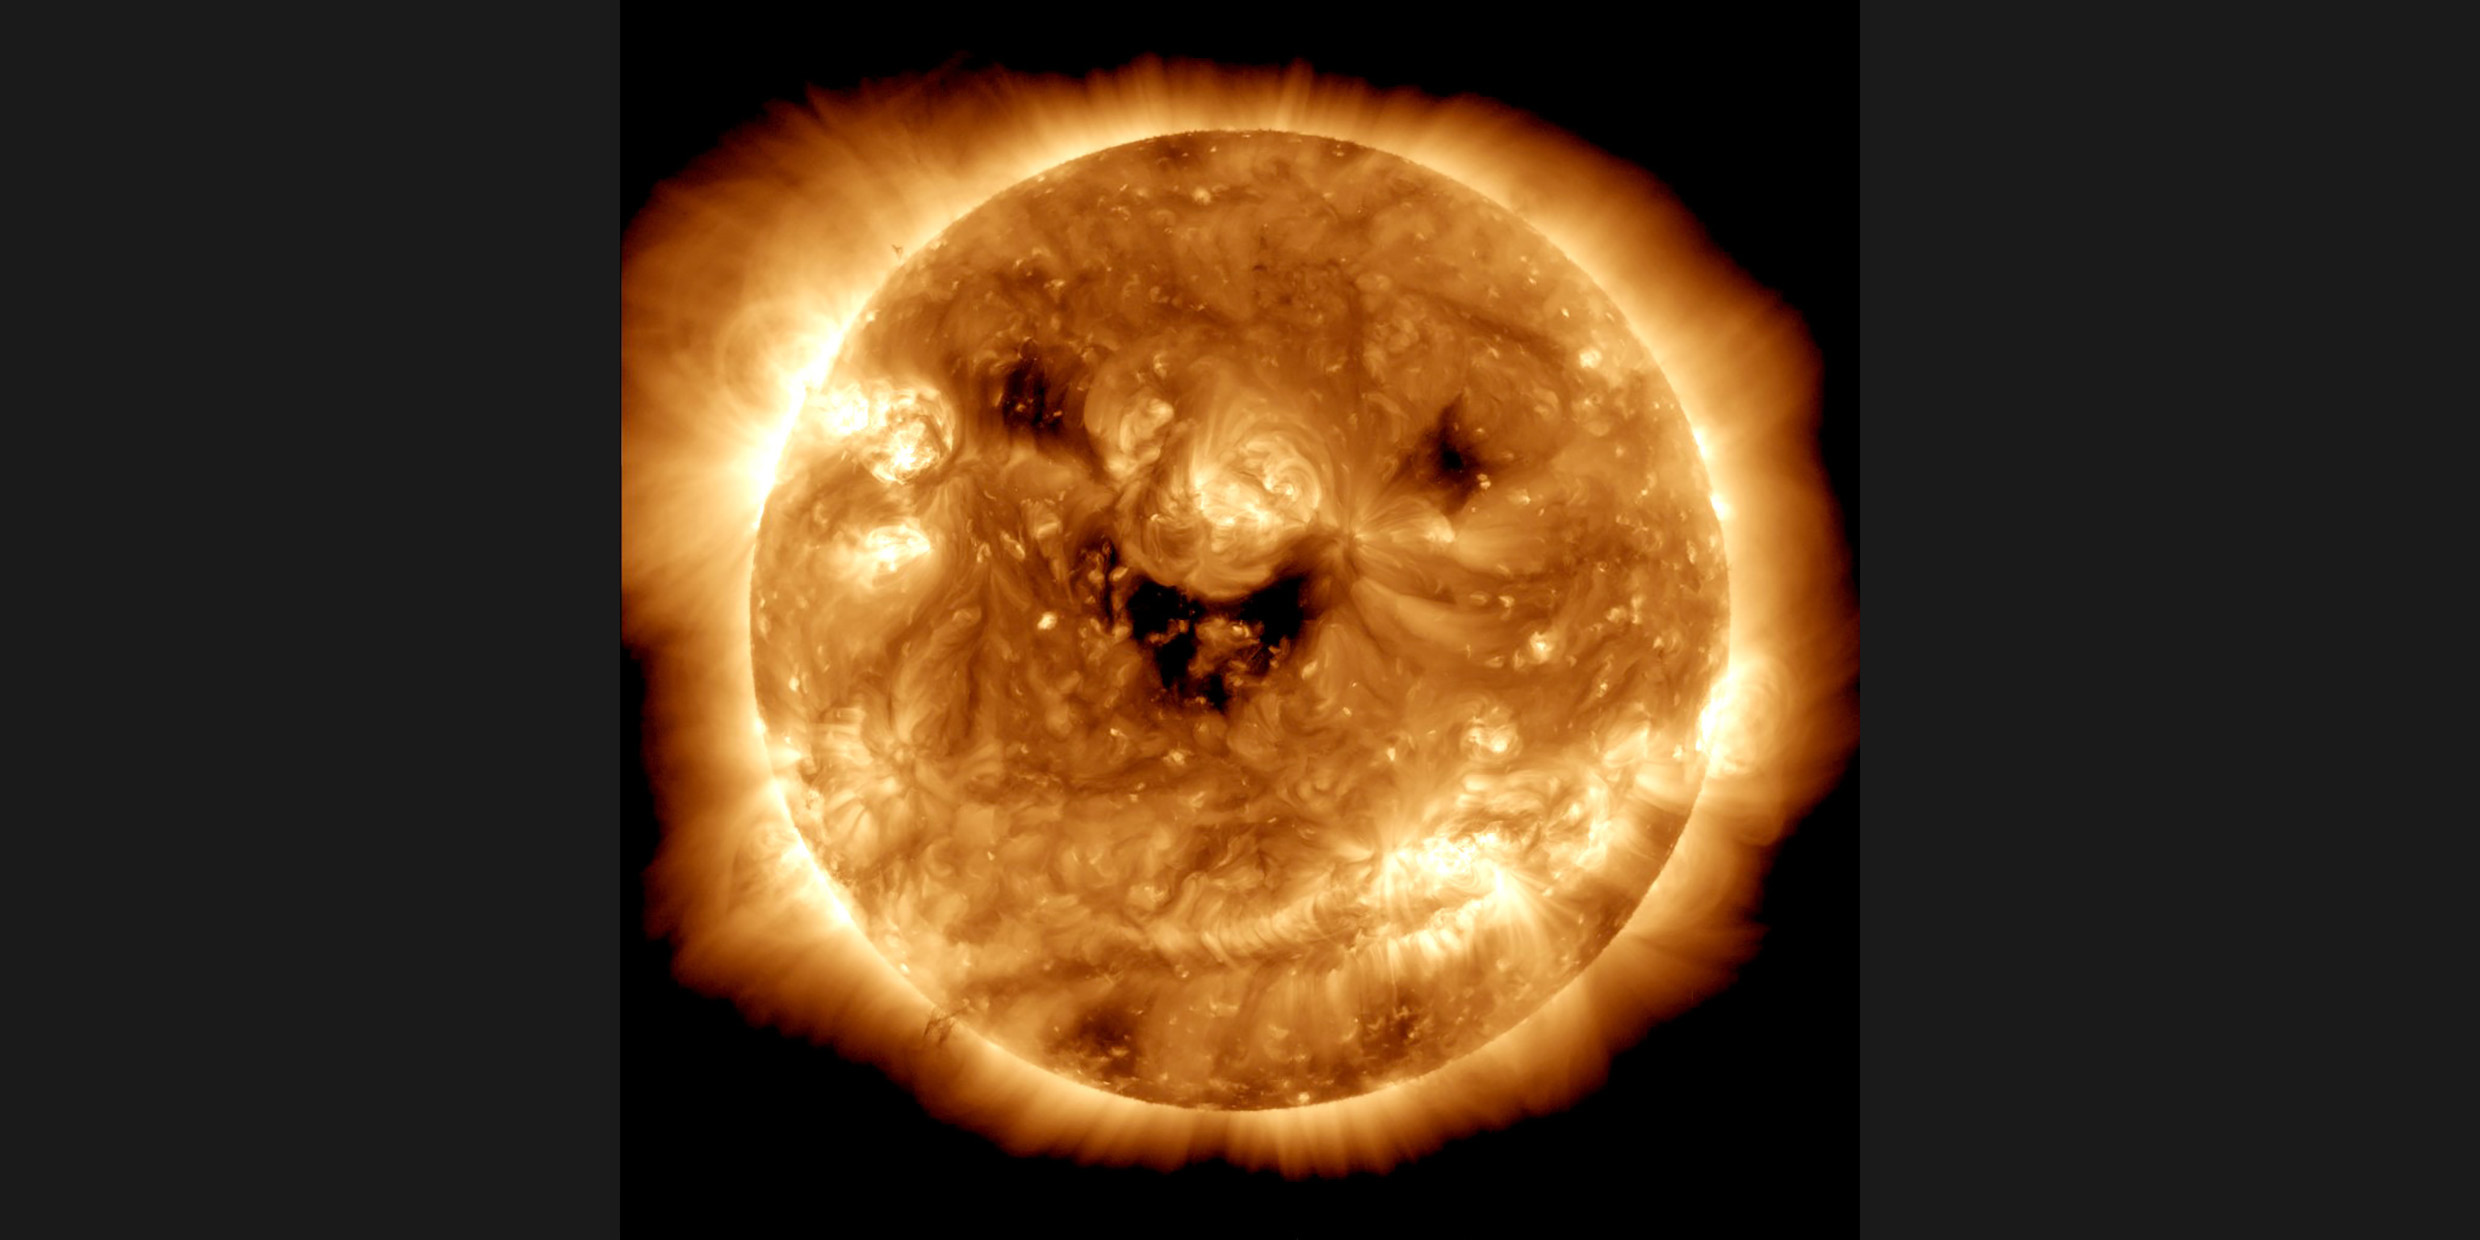 Telescopic image of the sun with dark spots that resembles a smiling face